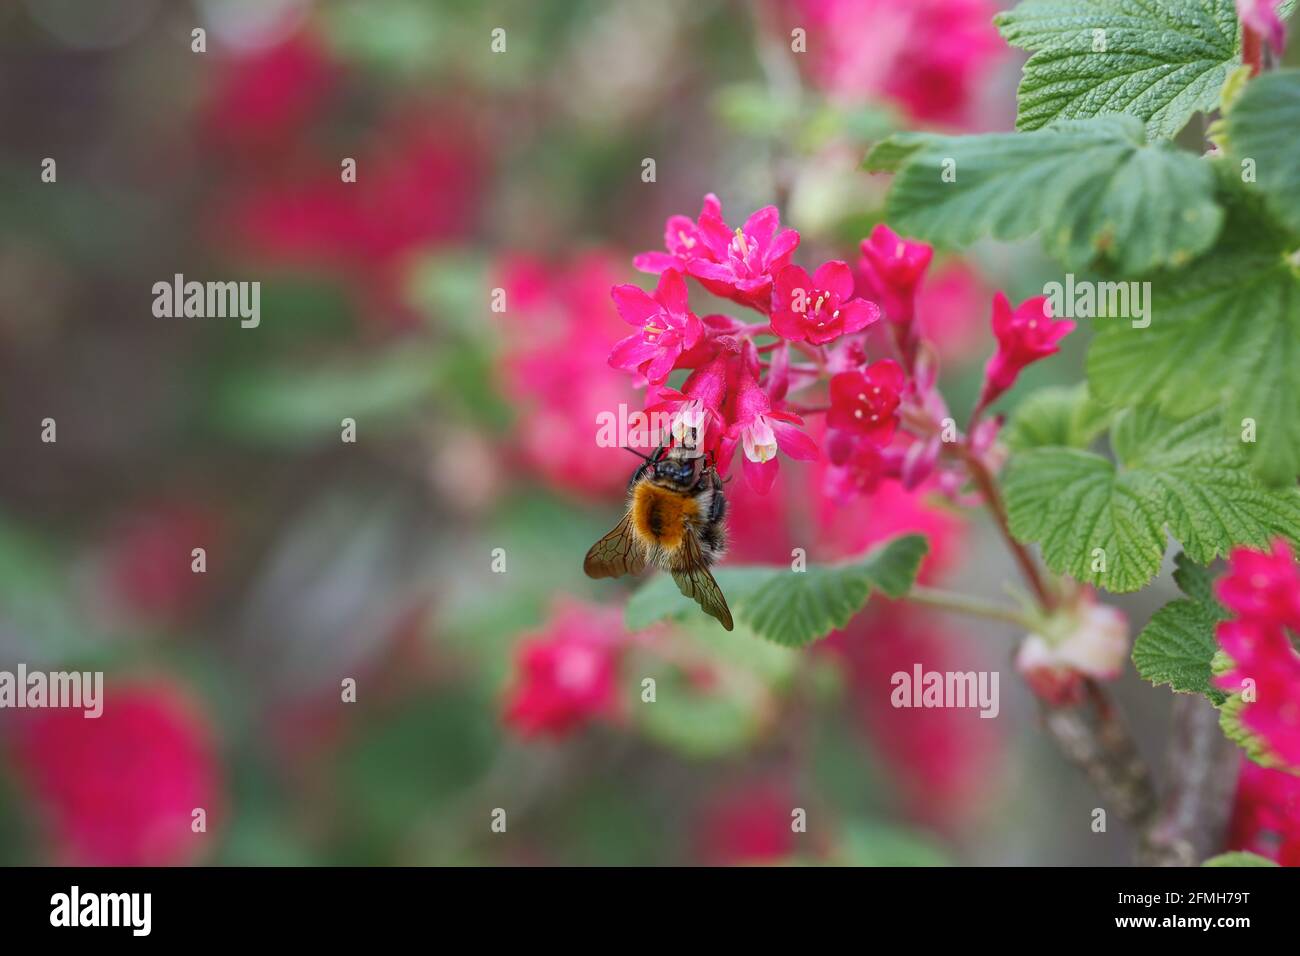 Tree Bumblebee Pollinates Red Currant Flower during Spring. Bombus Hypnorum also called New Garden Bumblebee Collects Nectar from Ribes Sanguineum. Stock Photo